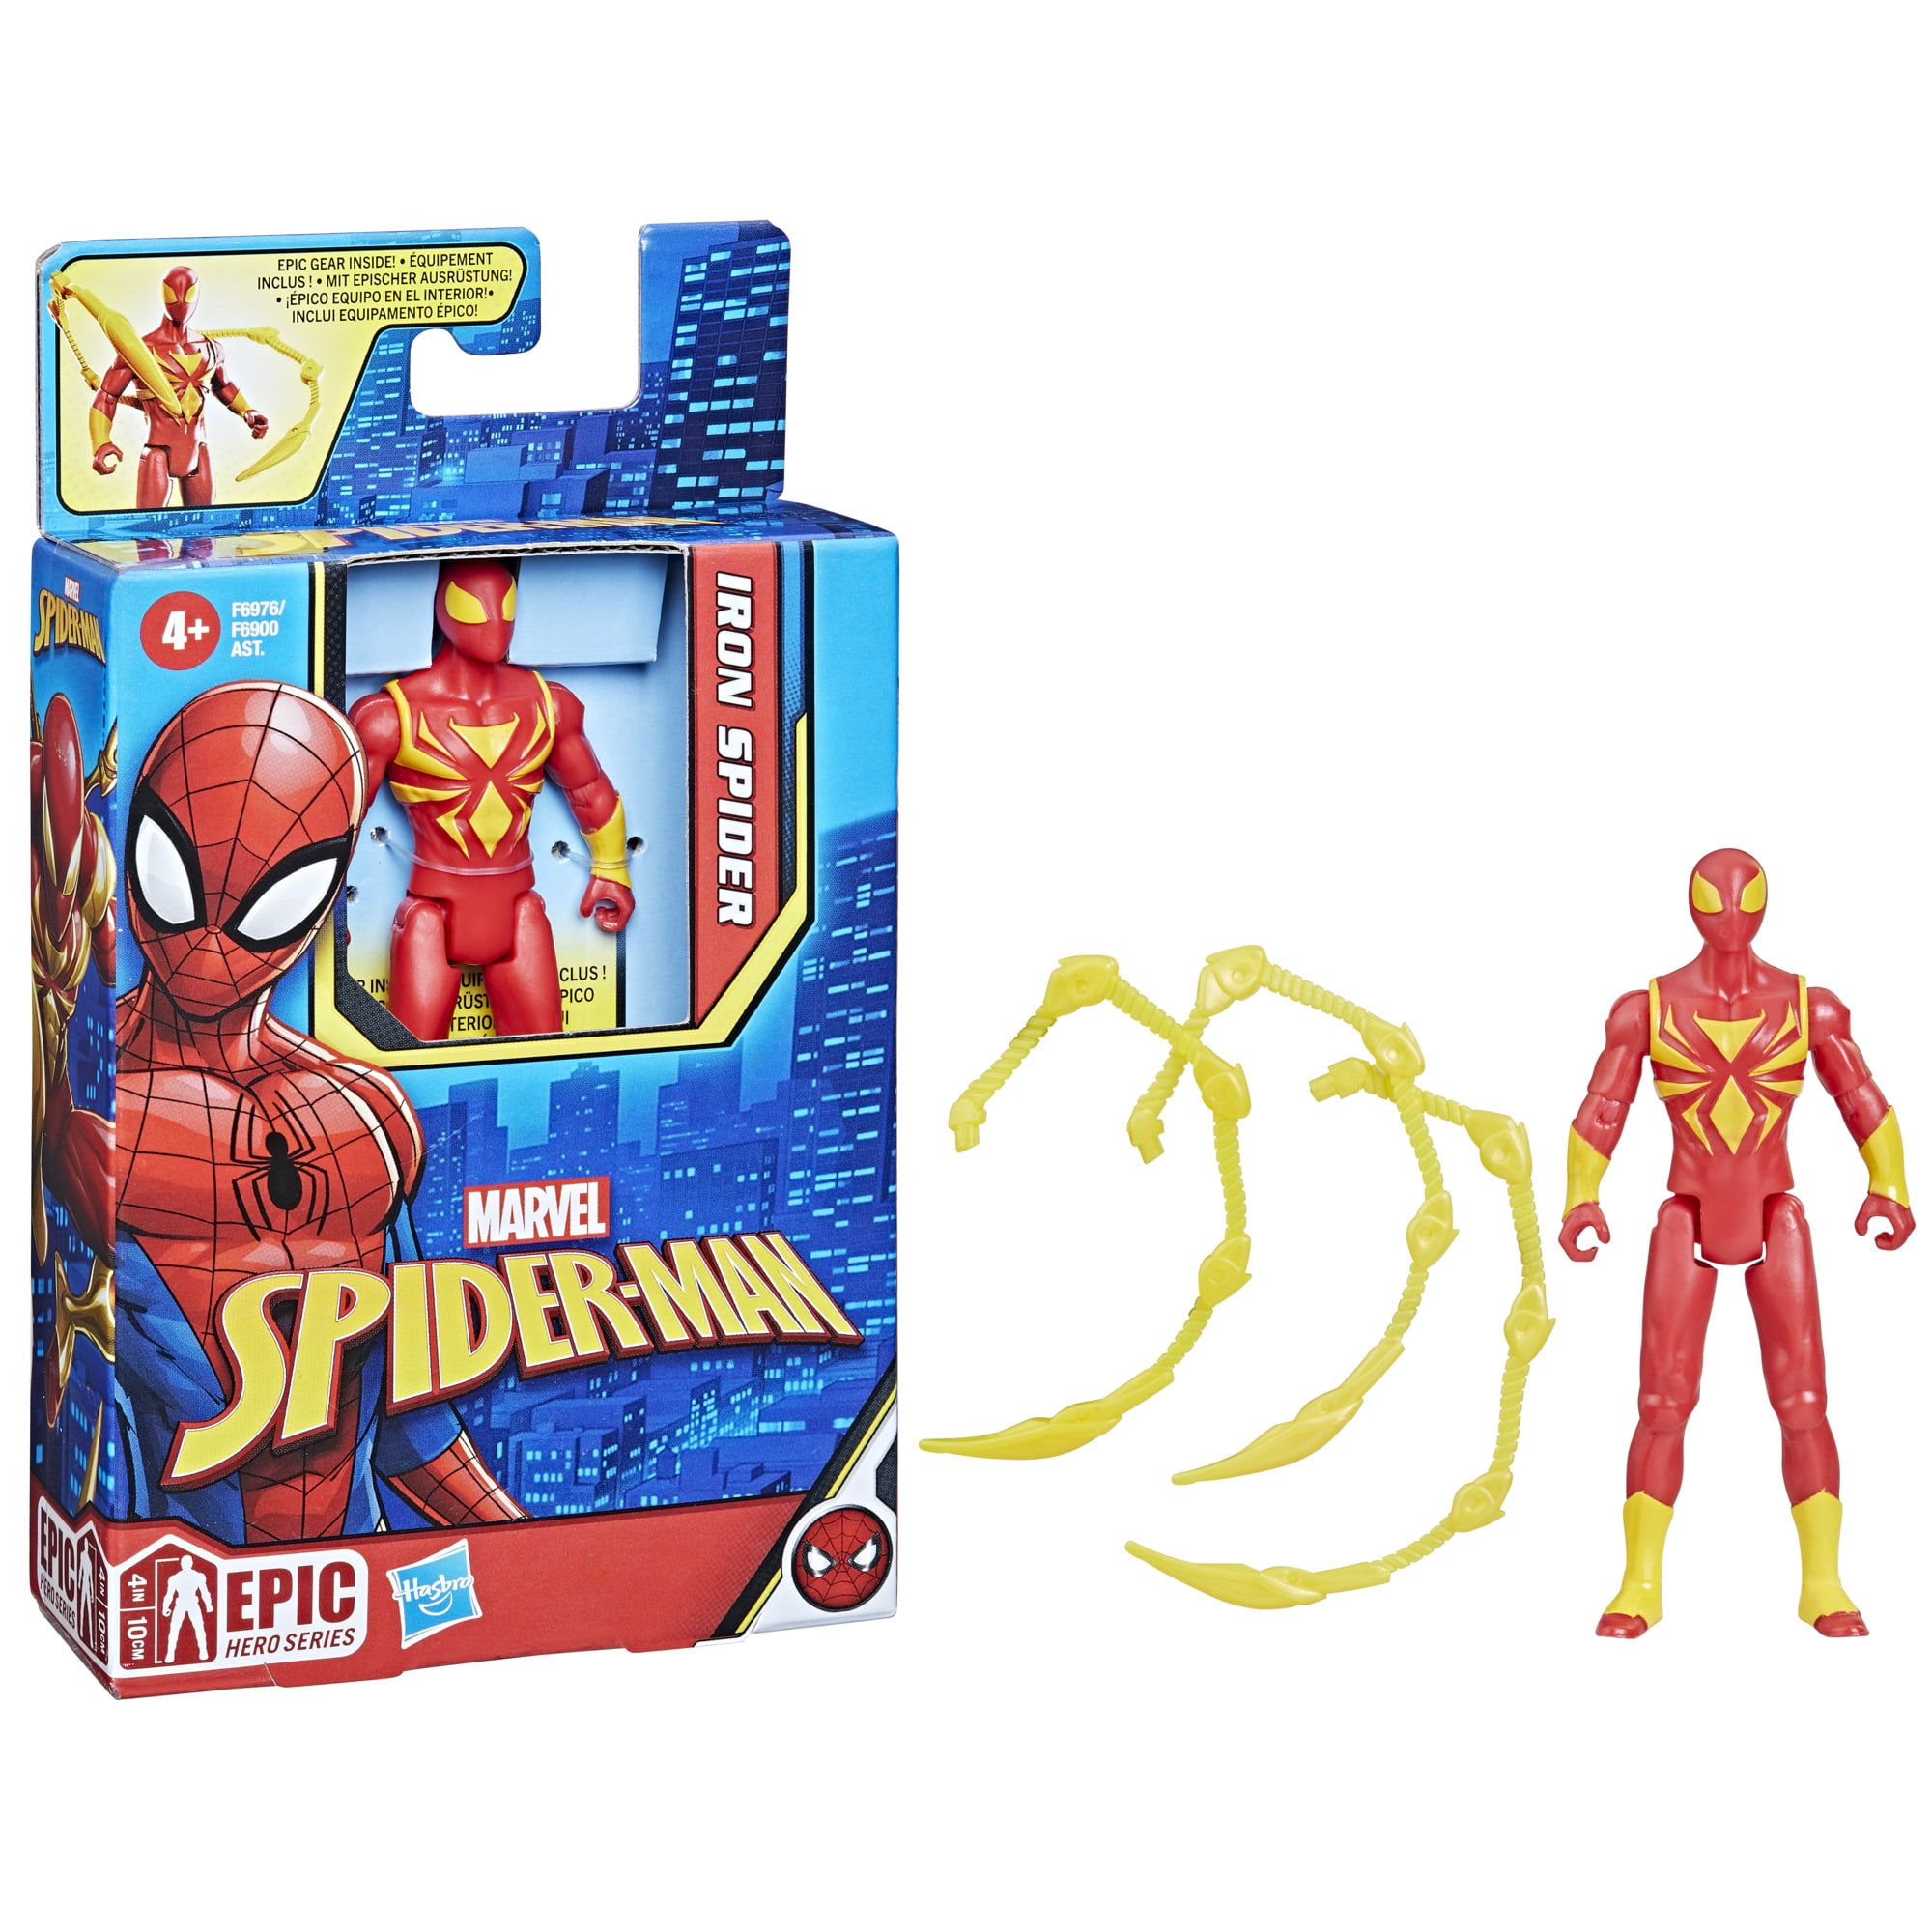 Marvel Spider-Man Epic Hero Series 4-Inch-Scale Action Figures